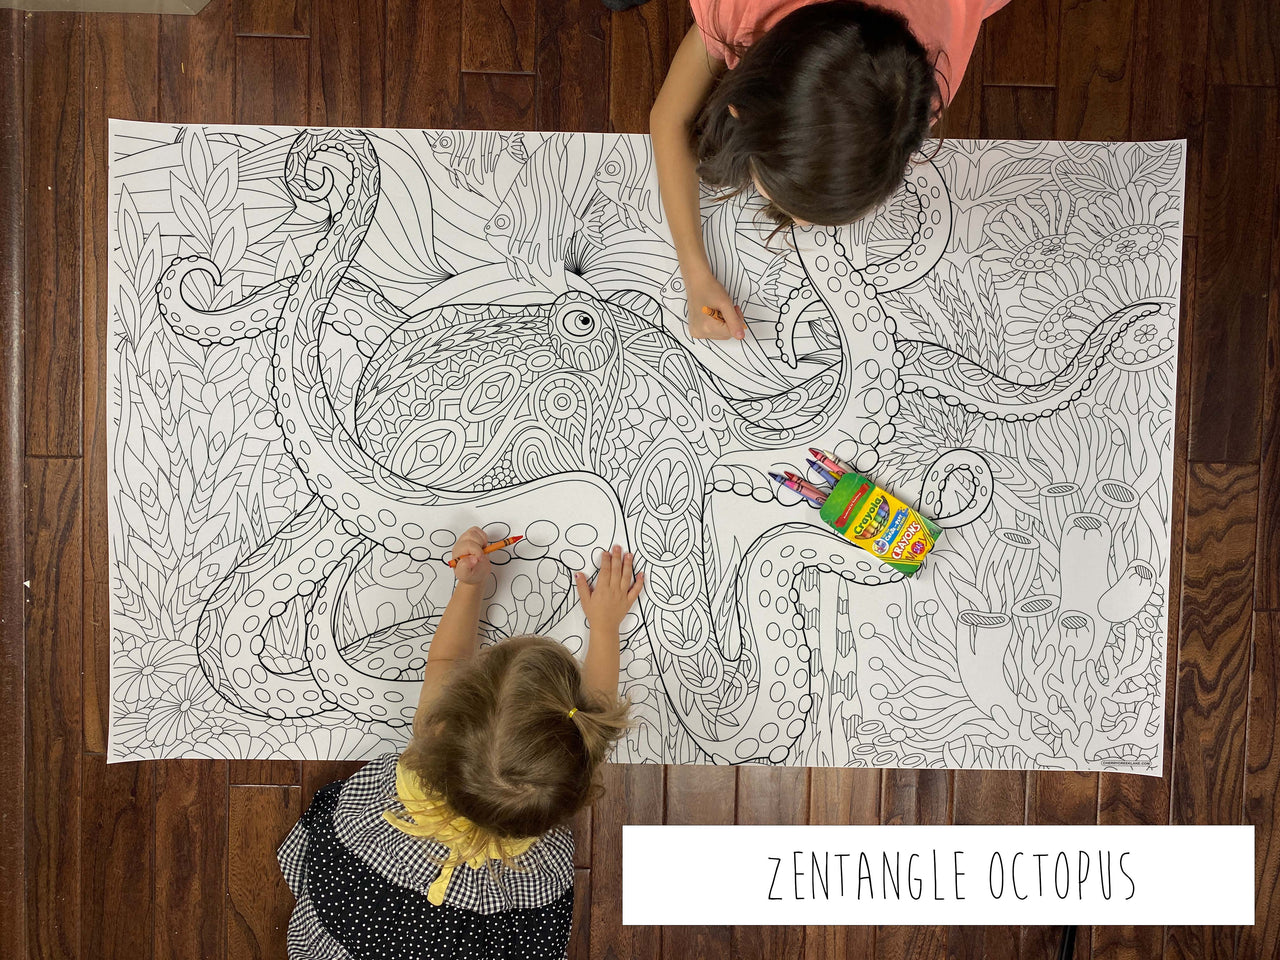 Zentangle Octopus Table Size Coloring Sheet